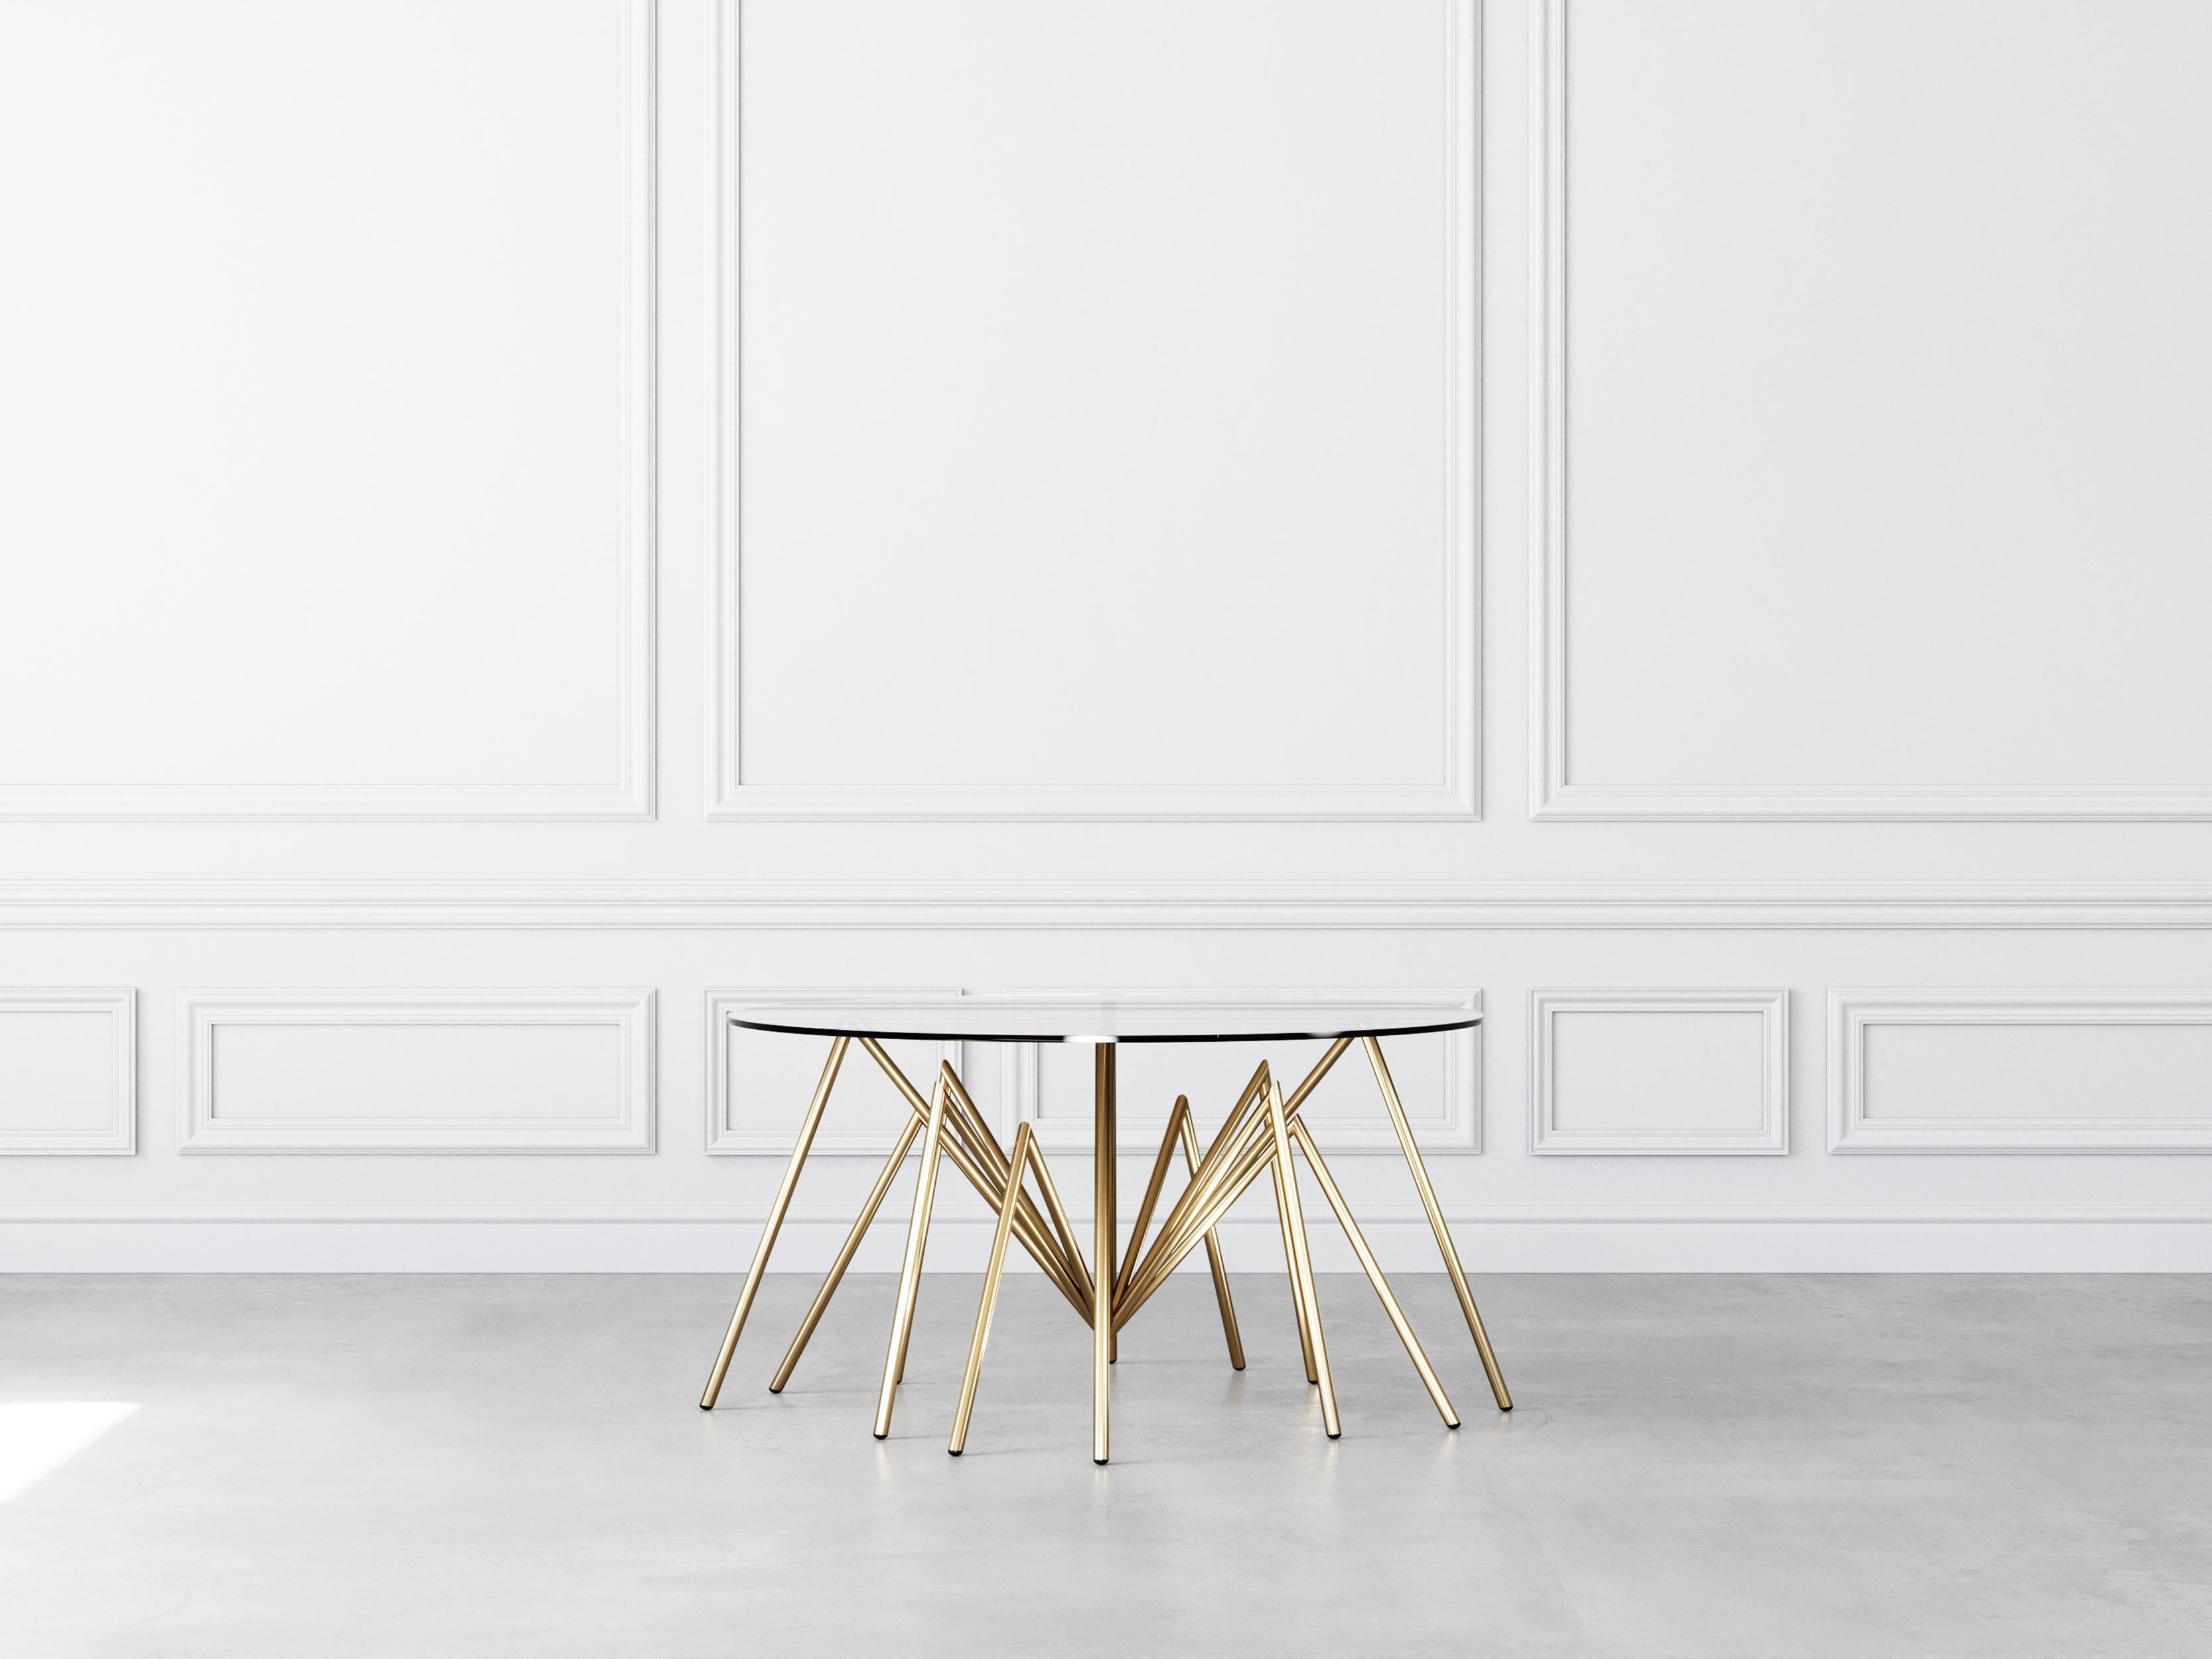 Zeville Ennox spider has it source in nature. It merges unconventional design with the highest demand for quality and high-end materials.
A stylistically singular piece with a stand-out design. Gold-plated by Hand using traditionell methods. Hand